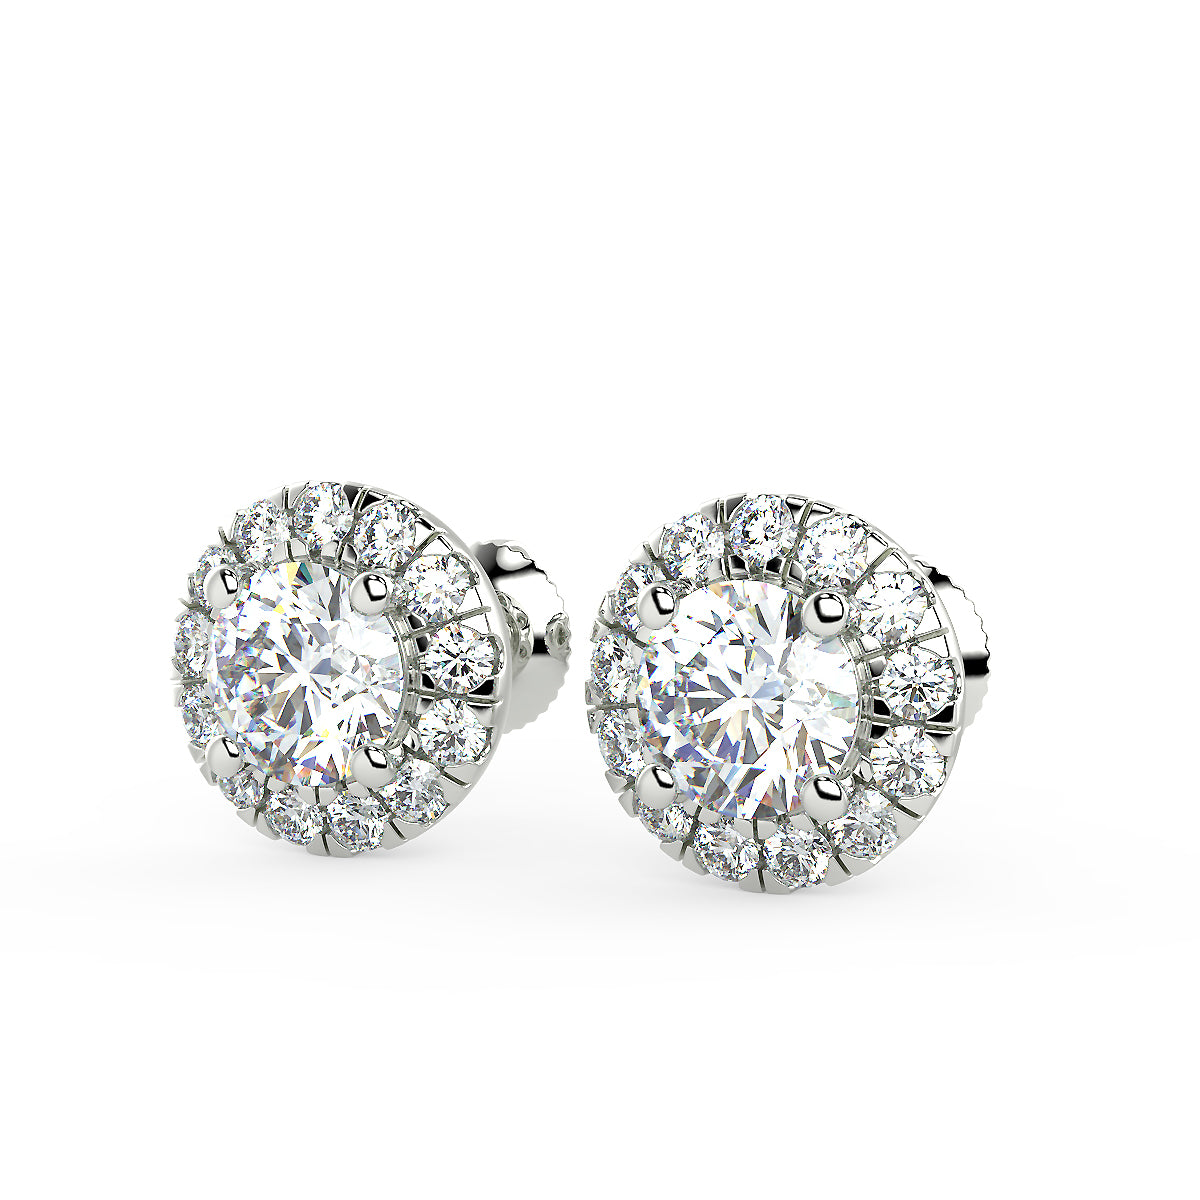 Cassiopeia Stud Earrings in White Gold (1.40 Ct. Tw.)